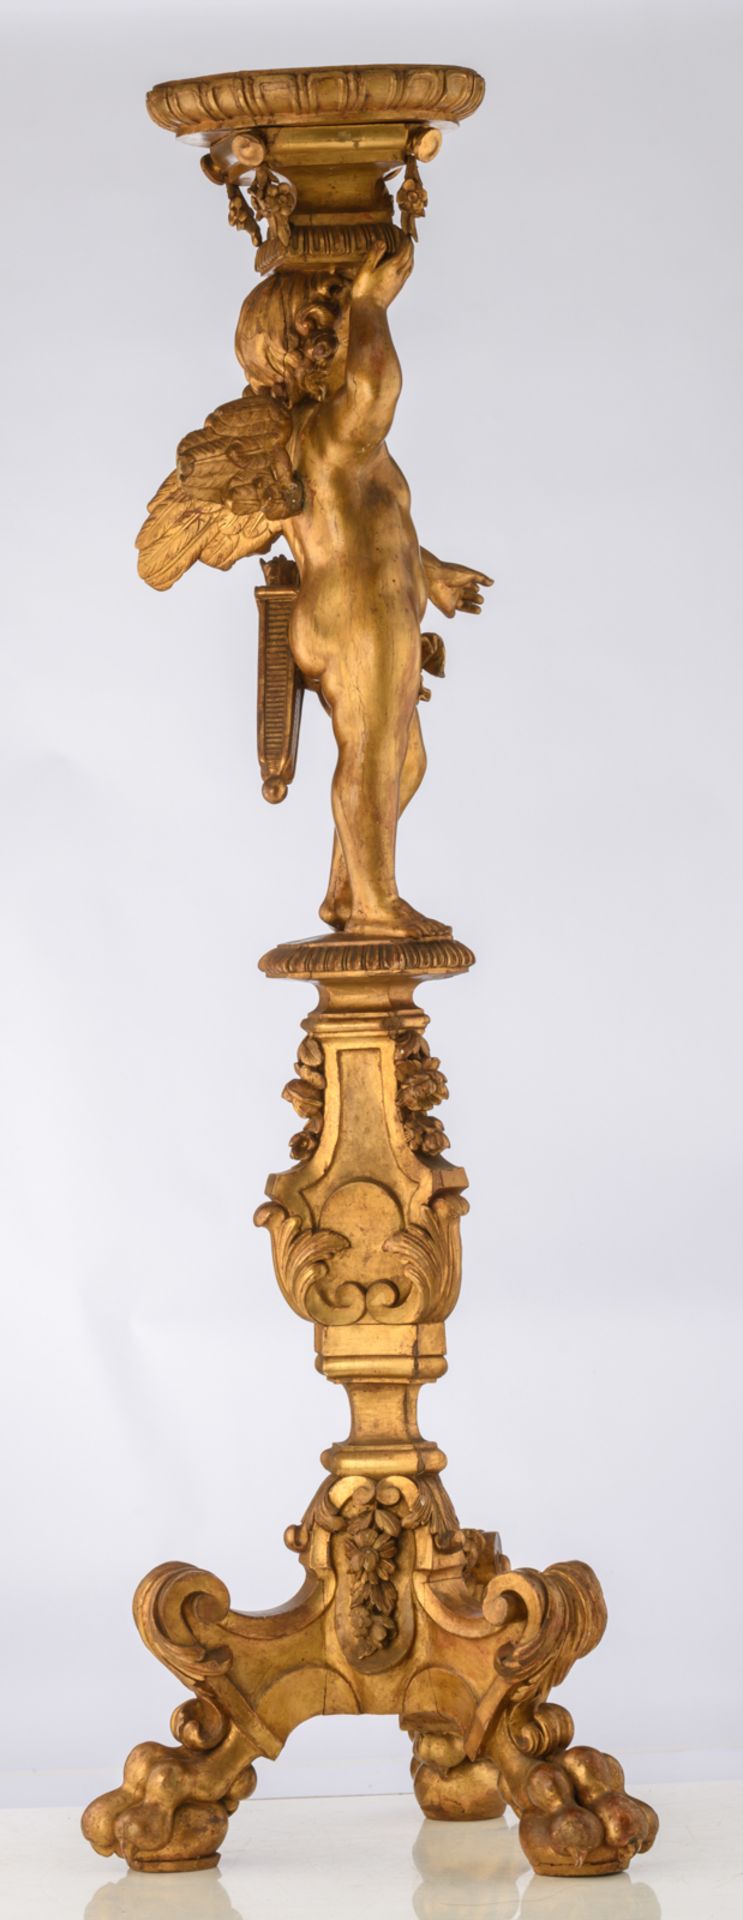 A 19thC Baroque Revival gilt wooden pedestal depicting an Amor figure on a stand, H 149cm - Image 2 of 6